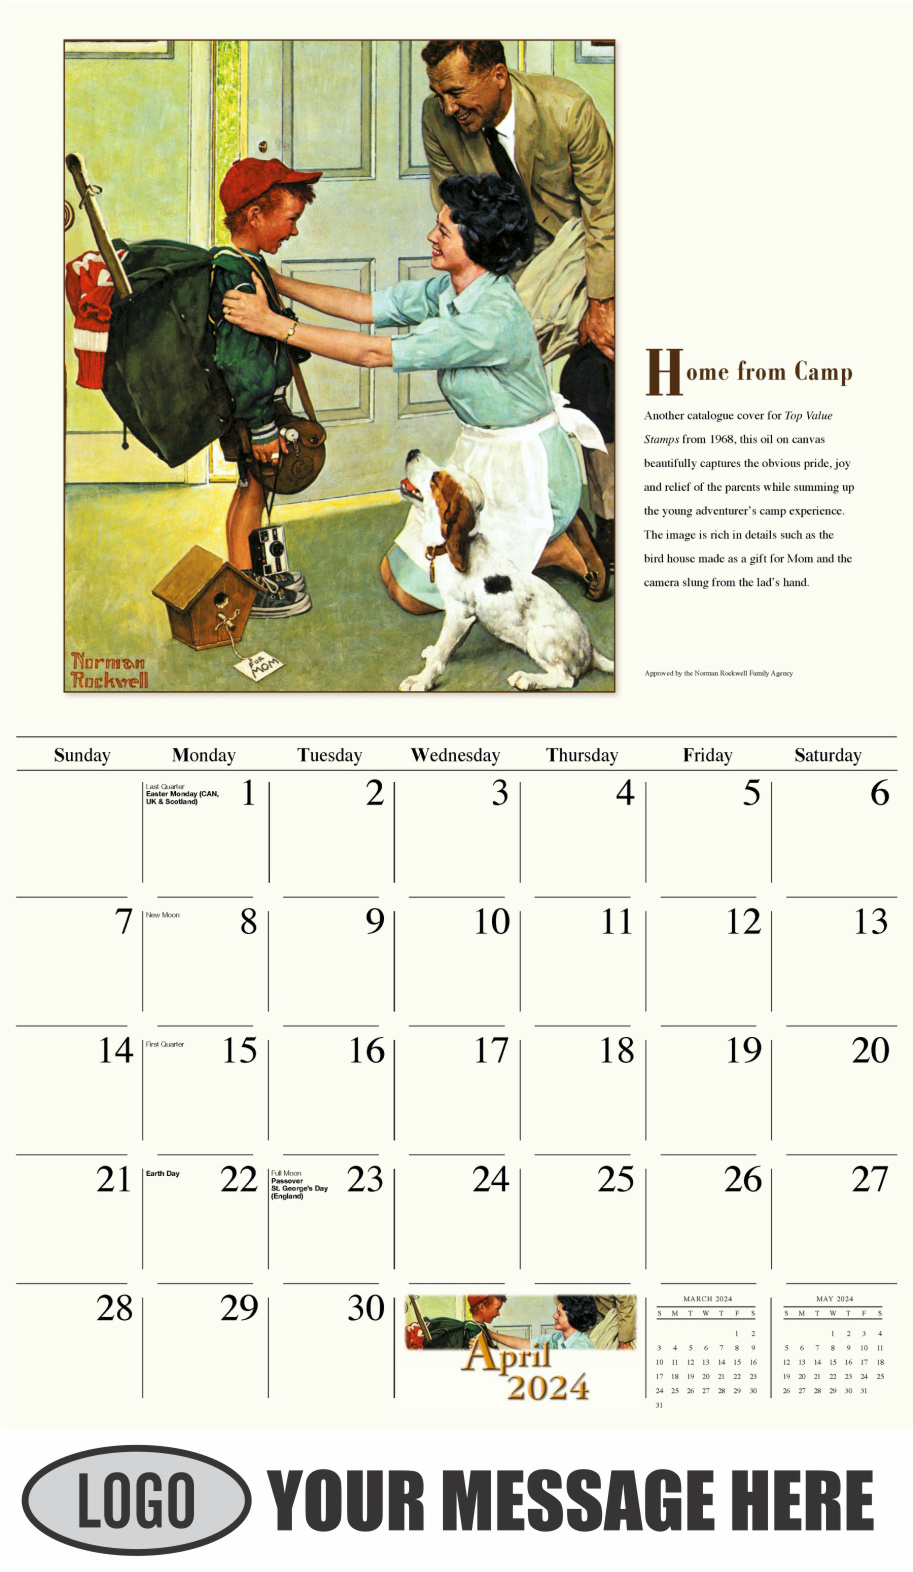 Memorable Images by Norman Rockwell 2024 Business Promotional Wall Calendar - April